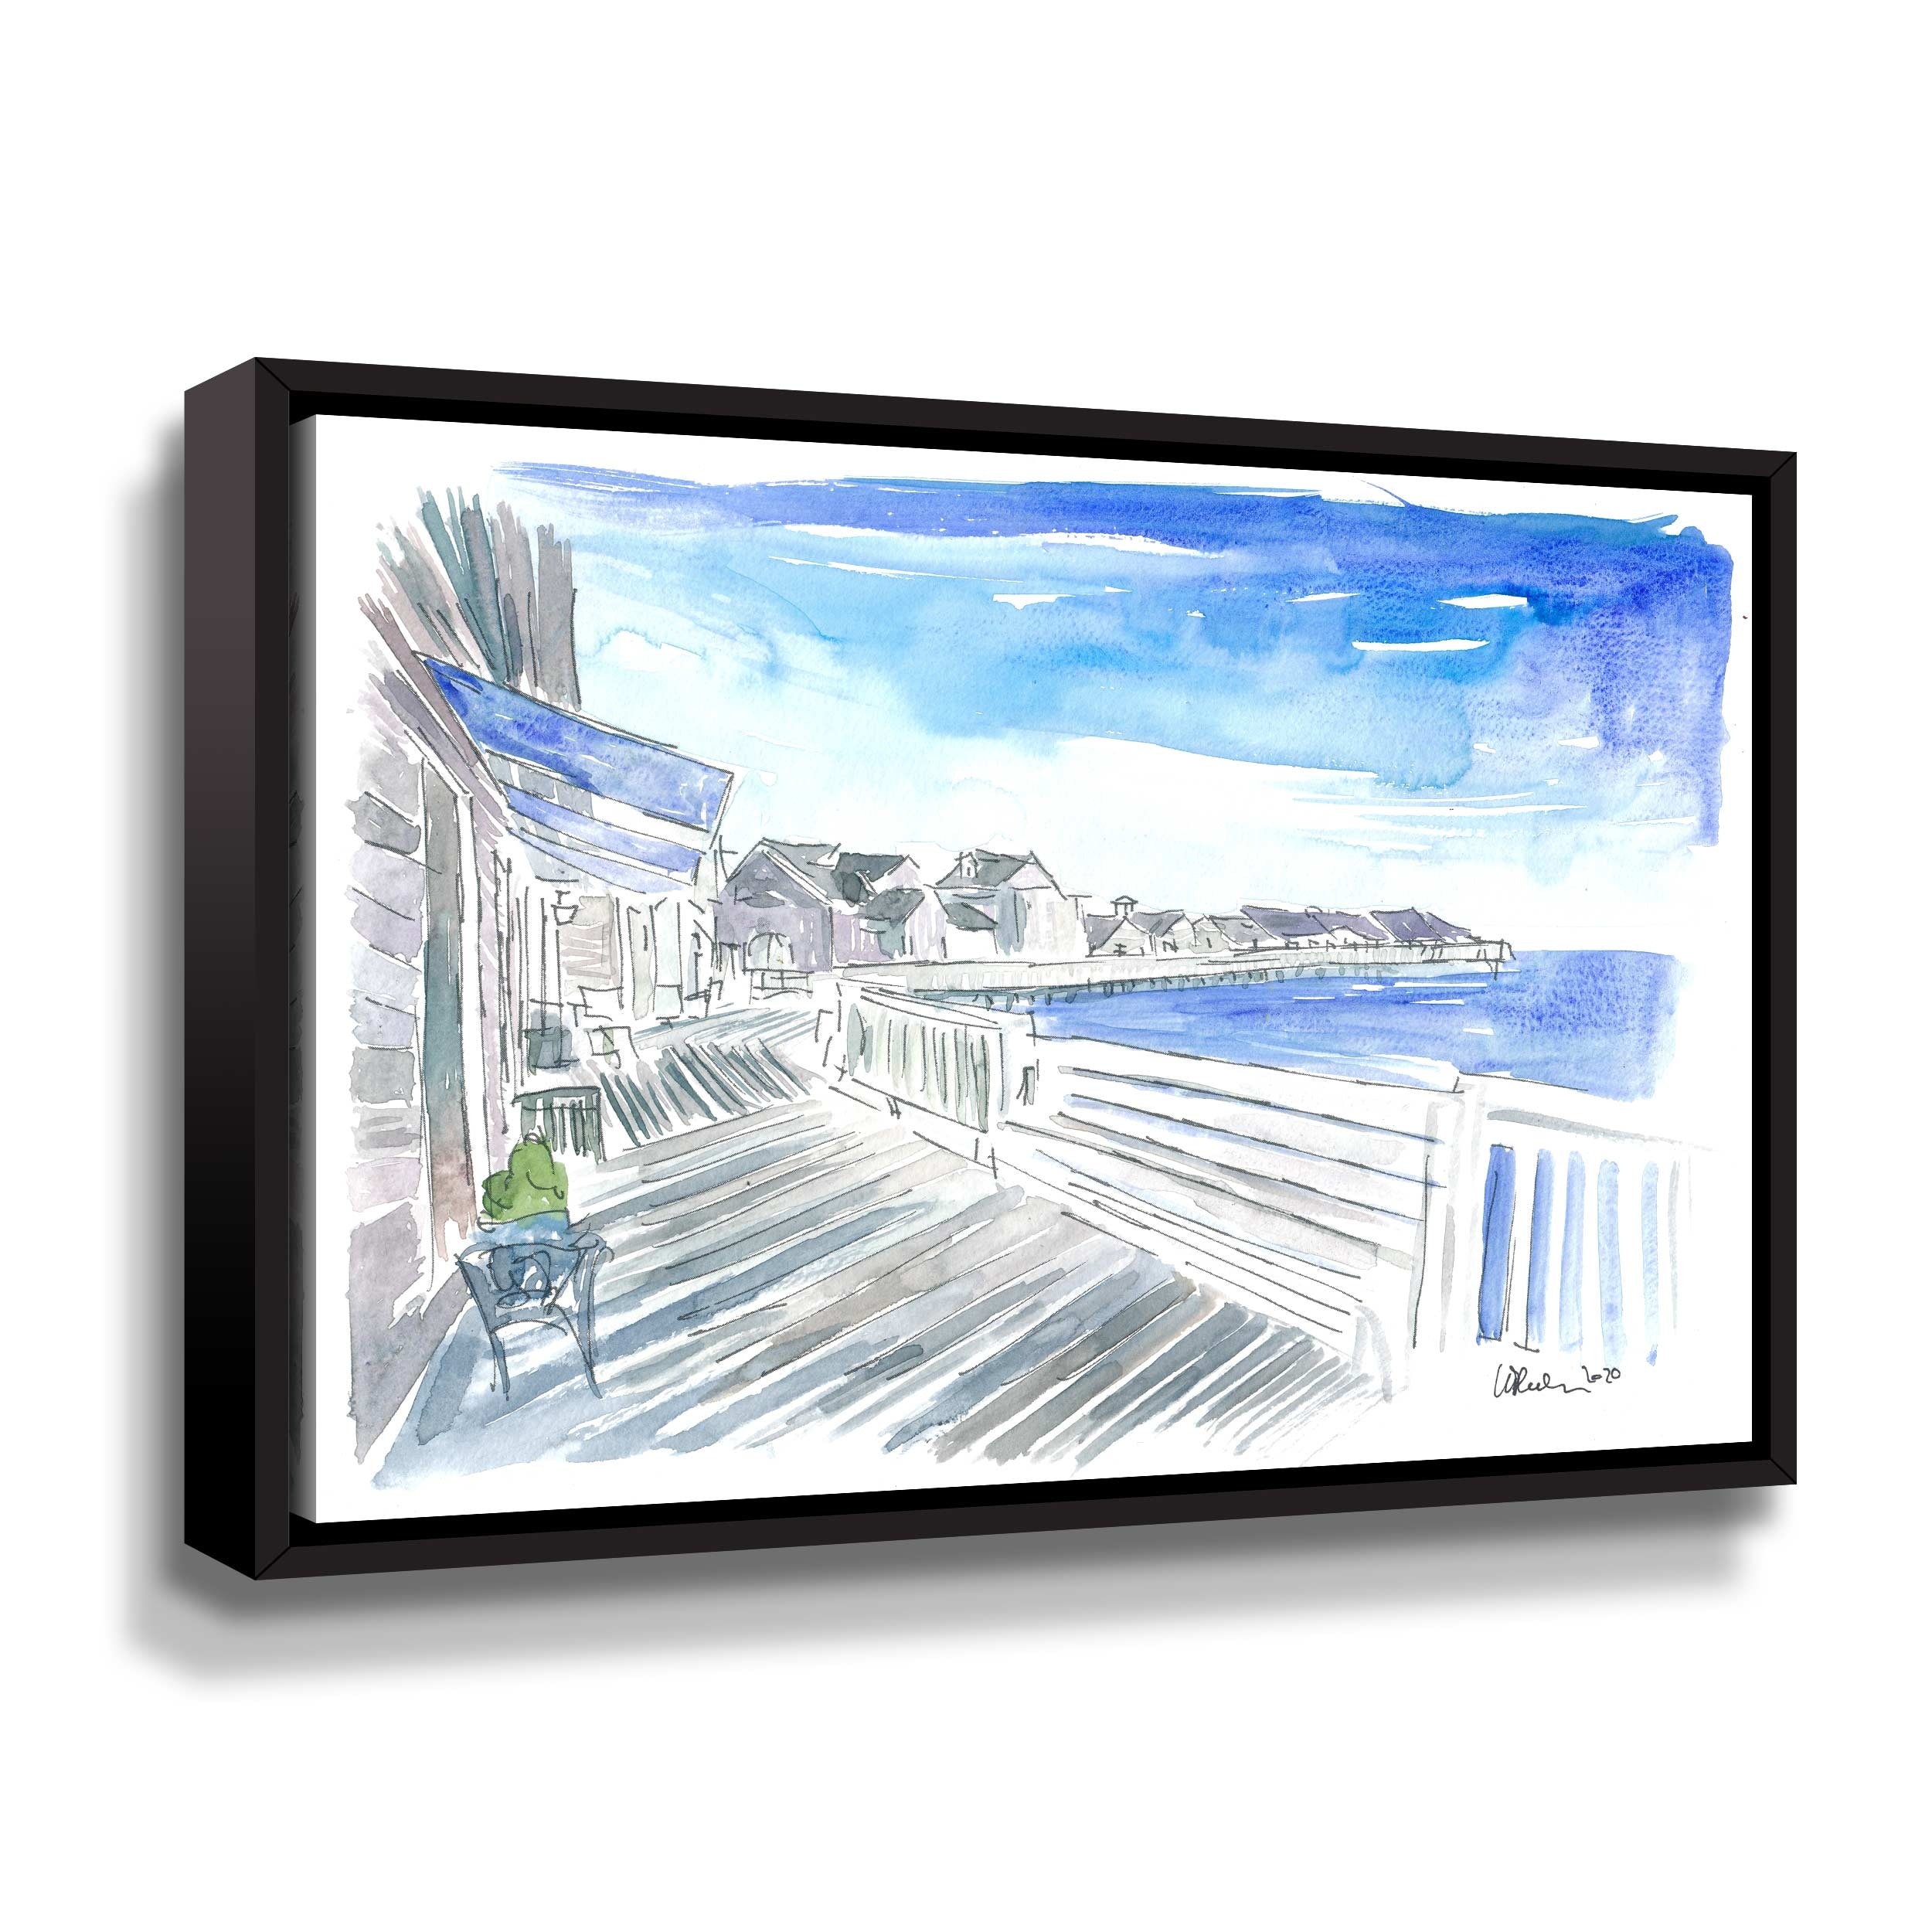 Outer Banks Currituck Sound Promenade Waterfront Gallery Wrapped Floater-framed  Canvas Bed Bath  Beyond 32433576